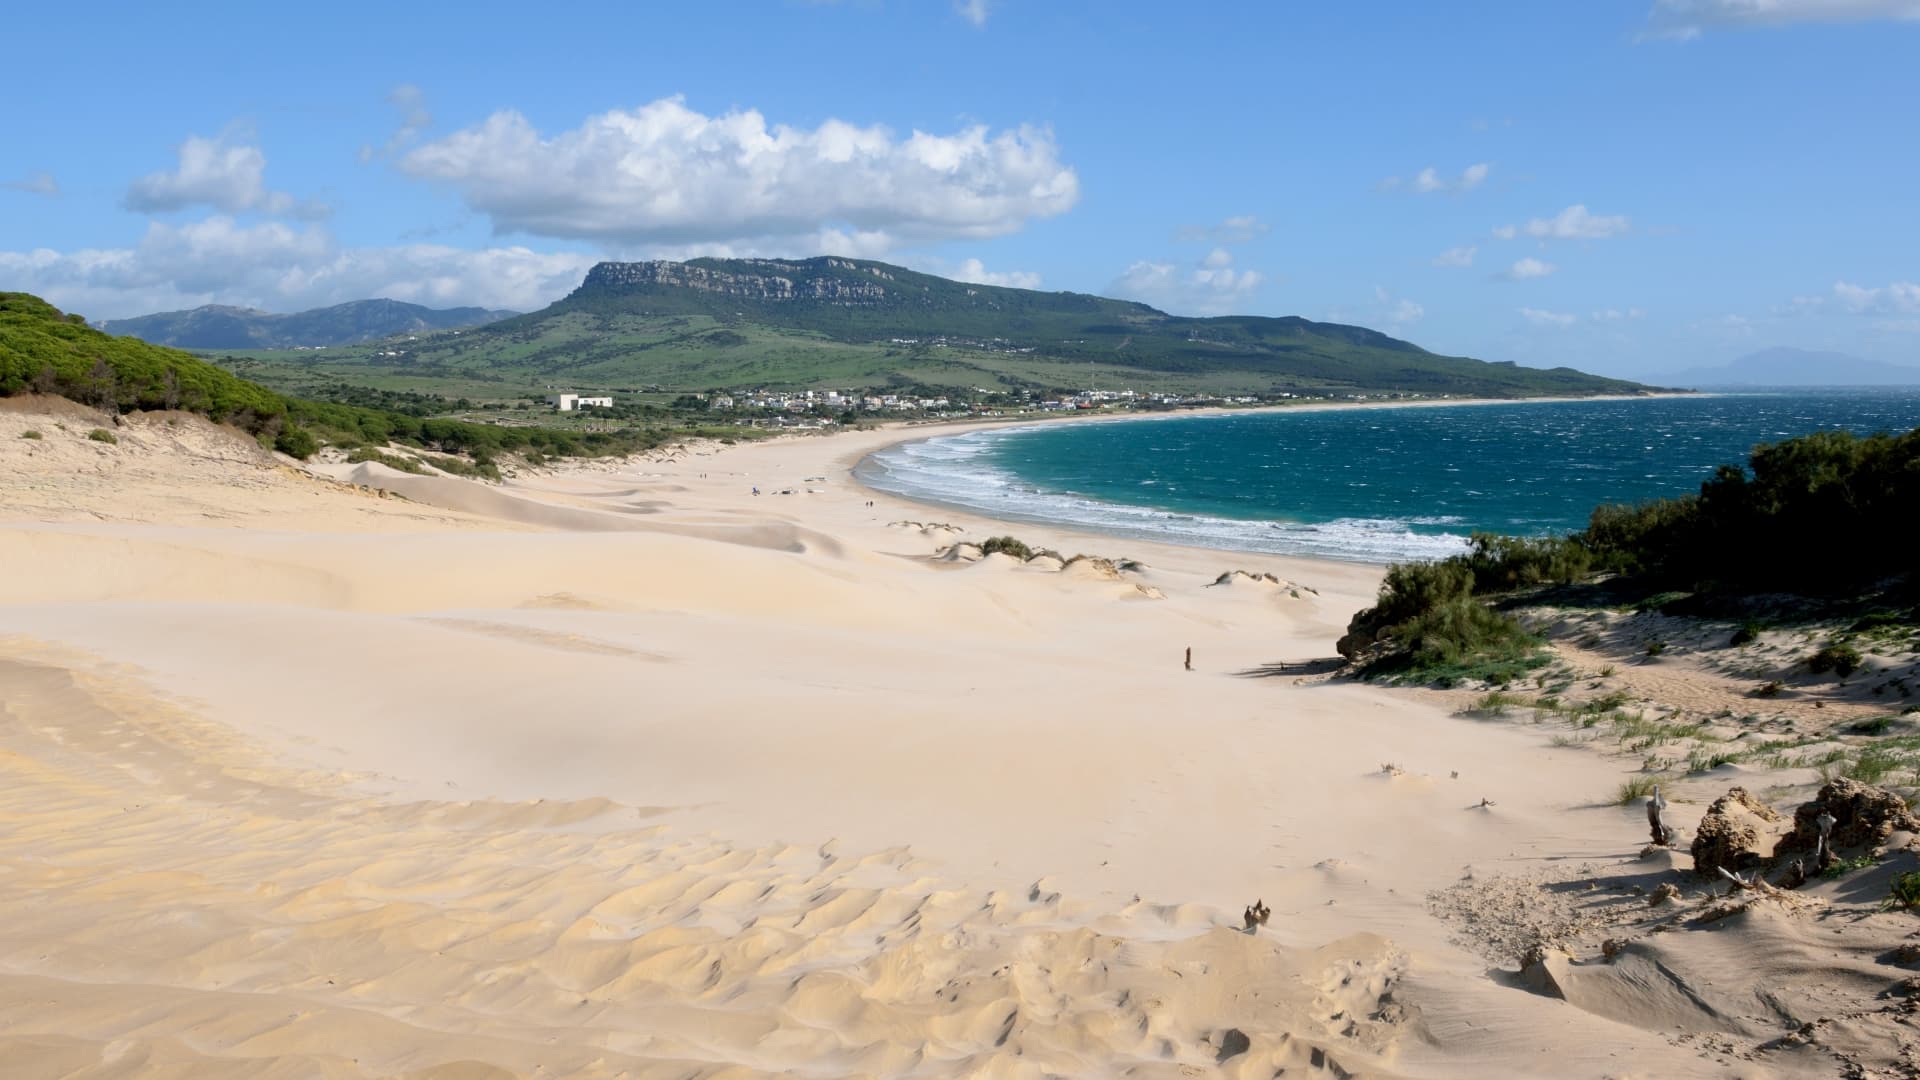 Bolonia beach, close to the town of Tarifa, the most southerly point in Europe.